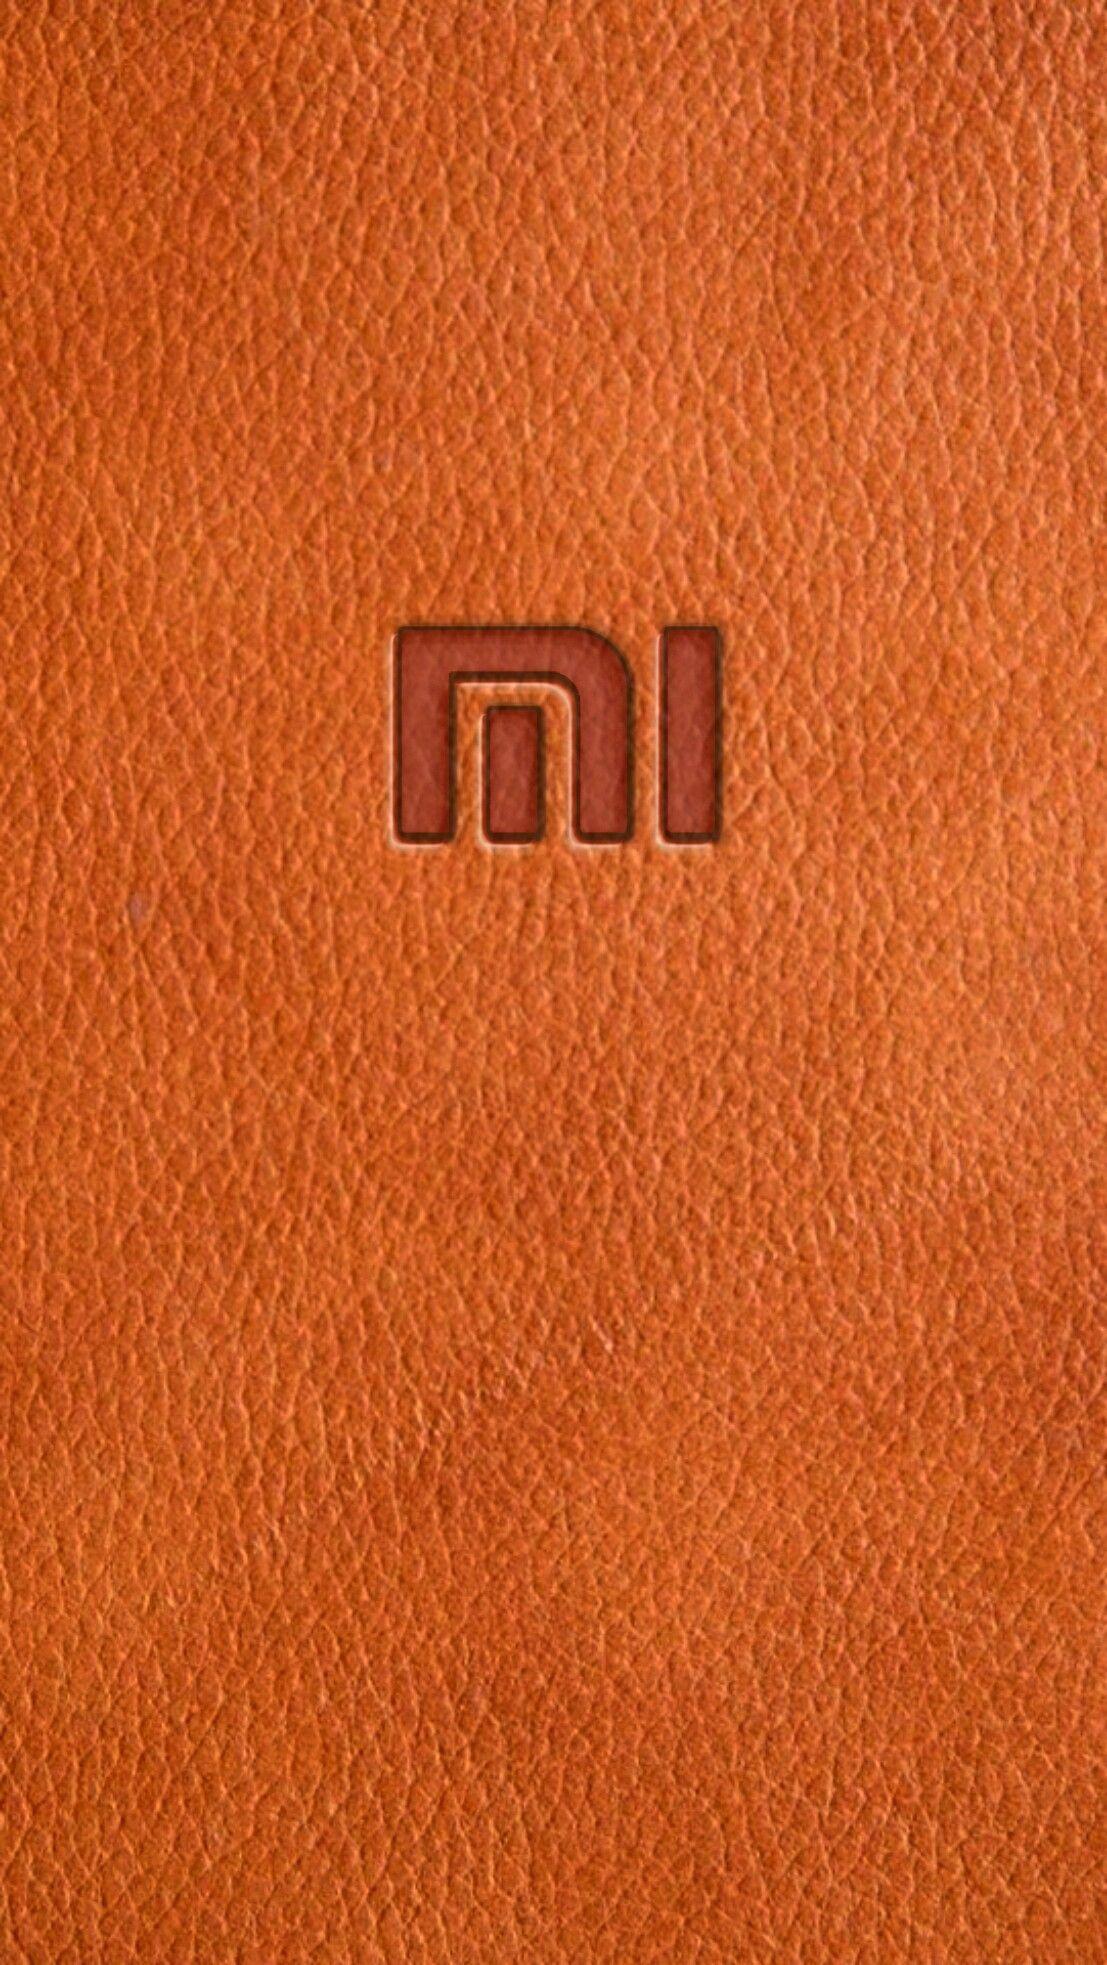 1080*1920px Xiaomi mobile wallpaper by Lumir79 in 2019